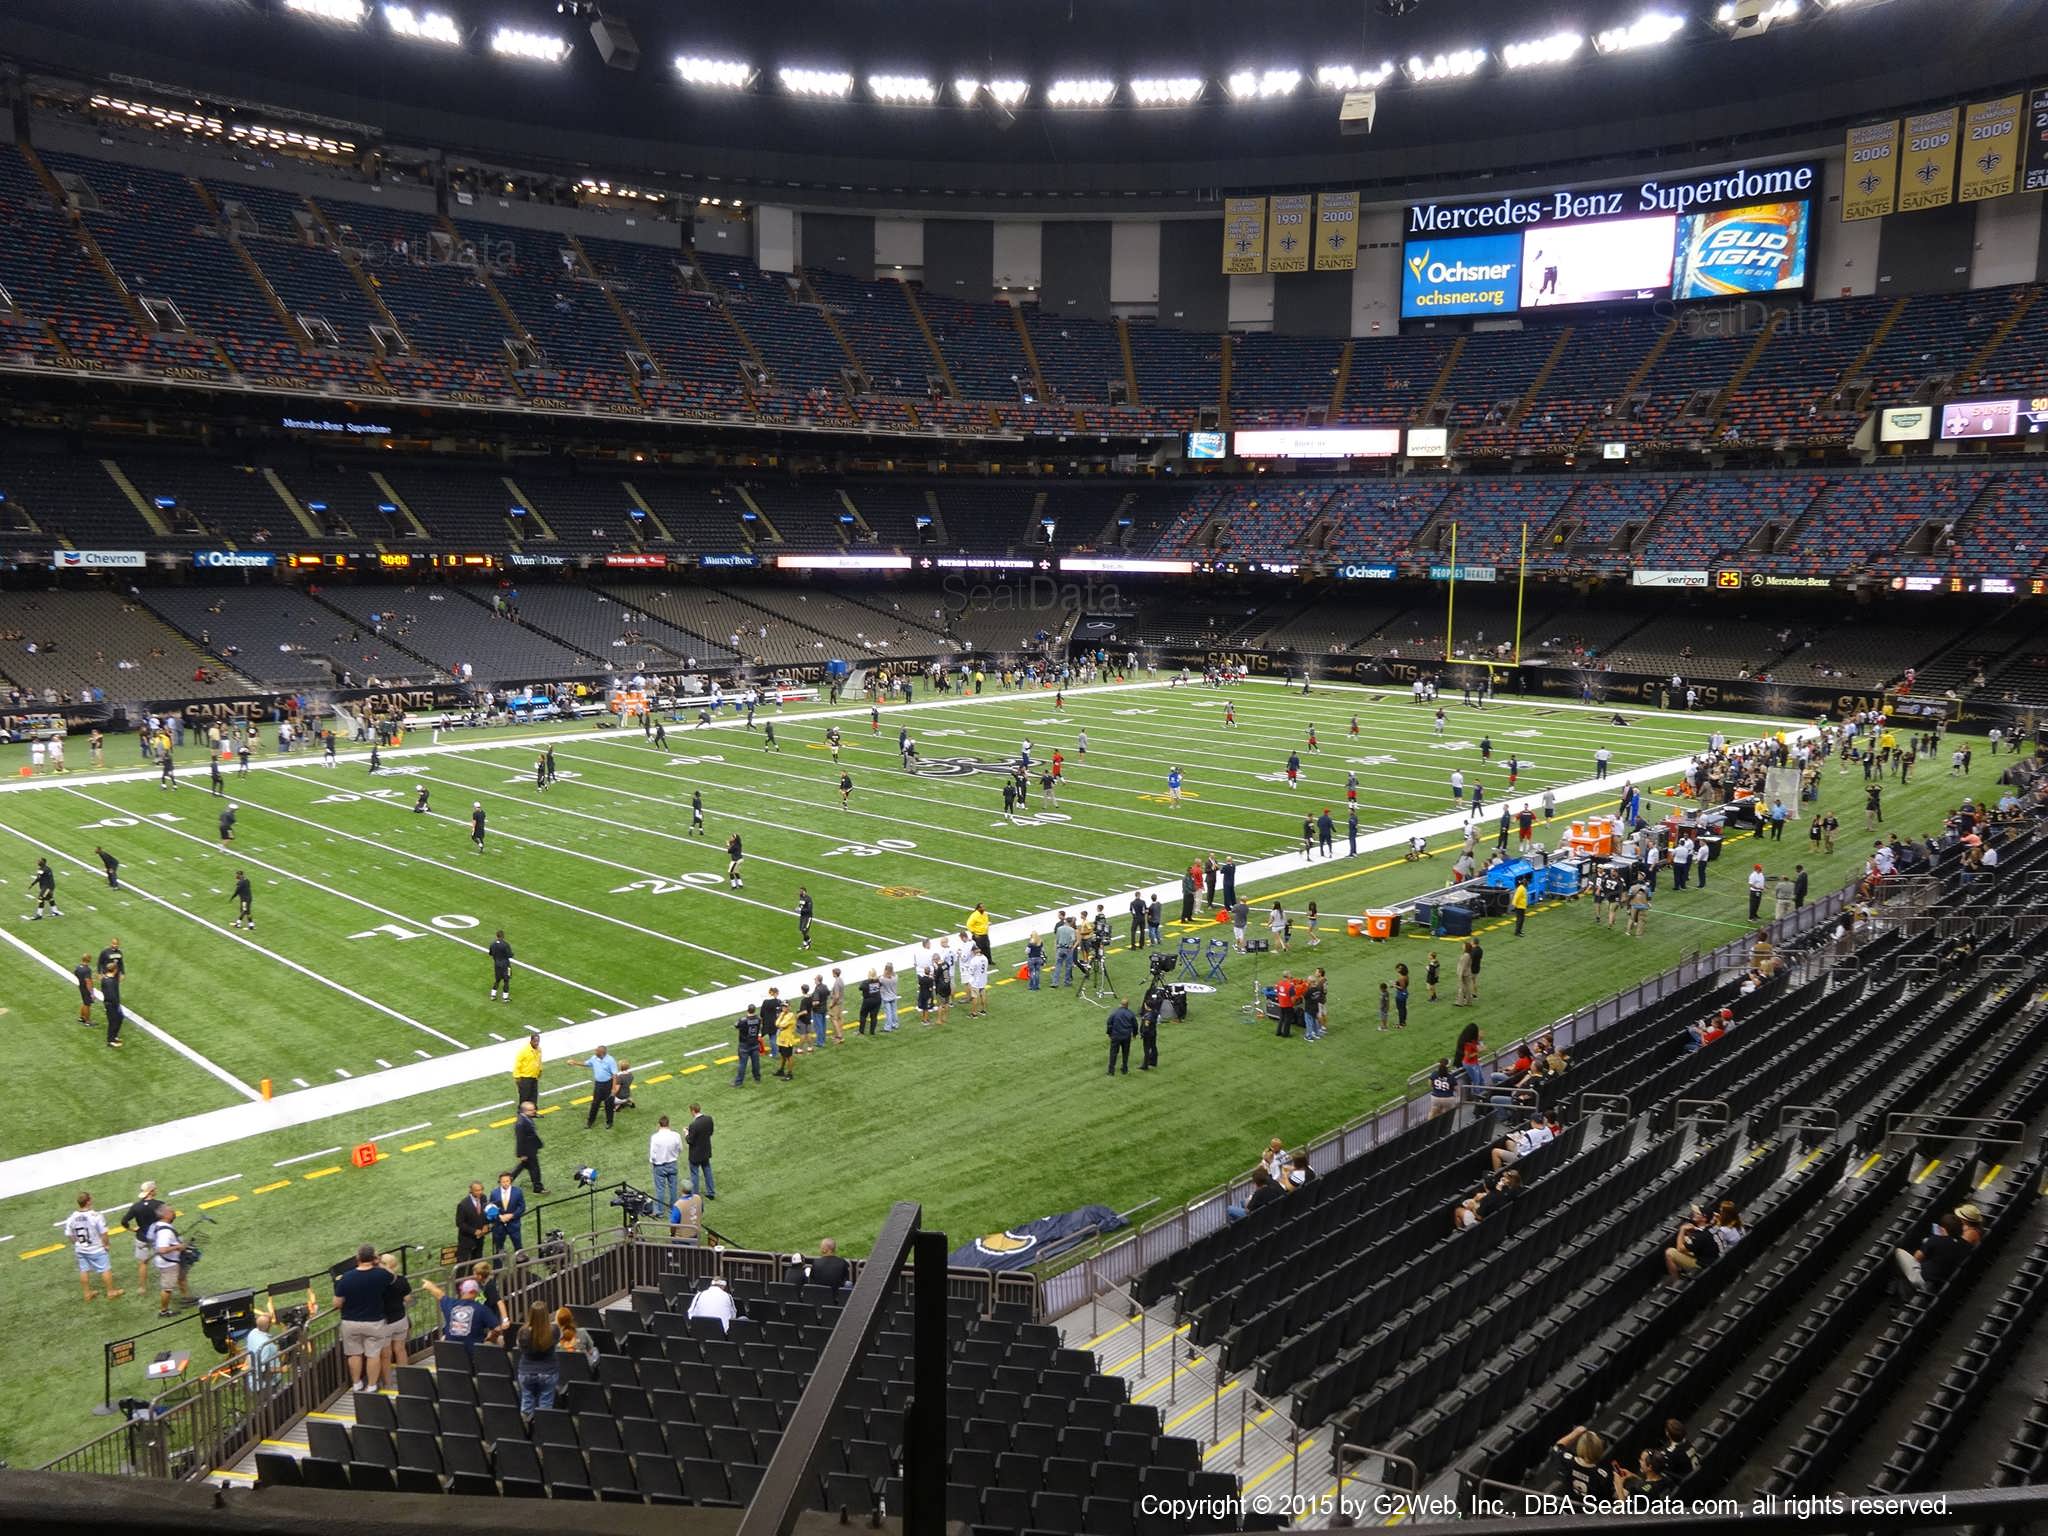 Seat view from section 232 at the Mercedes-Benz Superdome, home of the New Orleans Saints